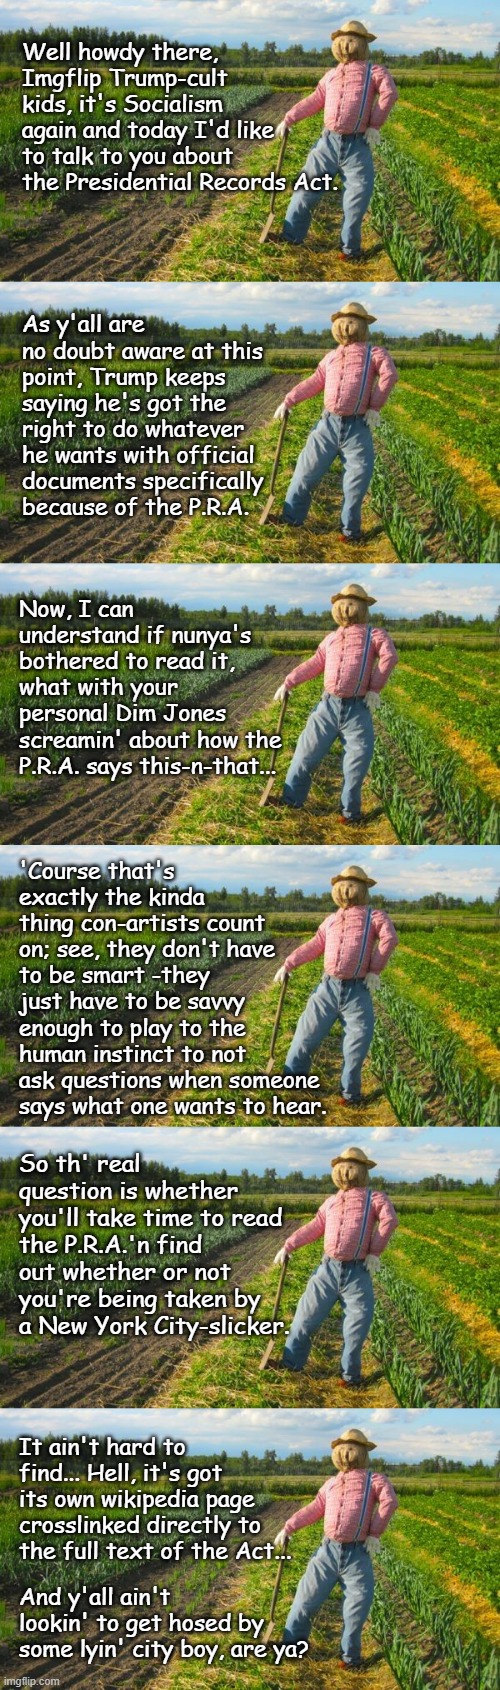 Even a farmer in the dell knows rotten when it smells... | Well howdy there, Imgflip Trump-cult kids, it's Socialism again and today I'd like to talk to you about the Presidential Records Act. As y'all are no doubt aware at this point, Trump keeps saying he's got the right to do whatever he wants with official documents specifically because of the P.R.A. Now, I can understand if nunya's bothered to read it, what with your personal Dim Jones screamin' about how the P.R.A. says this-n-that... 'Course that's exactly the kinda thing con-artists count on; see, they don't have to be smart -they just have to be savvy enough to play to the human instinct to not ask questions when someone says what one wants to hear. So th' real question is whether you'll take time to read the P.R.A.'n find out whether or not you're being taken by a New York City-slicker. It ain't hard to find... Hell, it's got its own wikipedia page crosslinked directly to the full text of the Act... And y'all ain't lookin' to get hosed by some lyin' city boy, are ya? | image tagged in scarecrow in field,trump unfit unqualified dangerous,liar | made w/ Imgflip meme maker